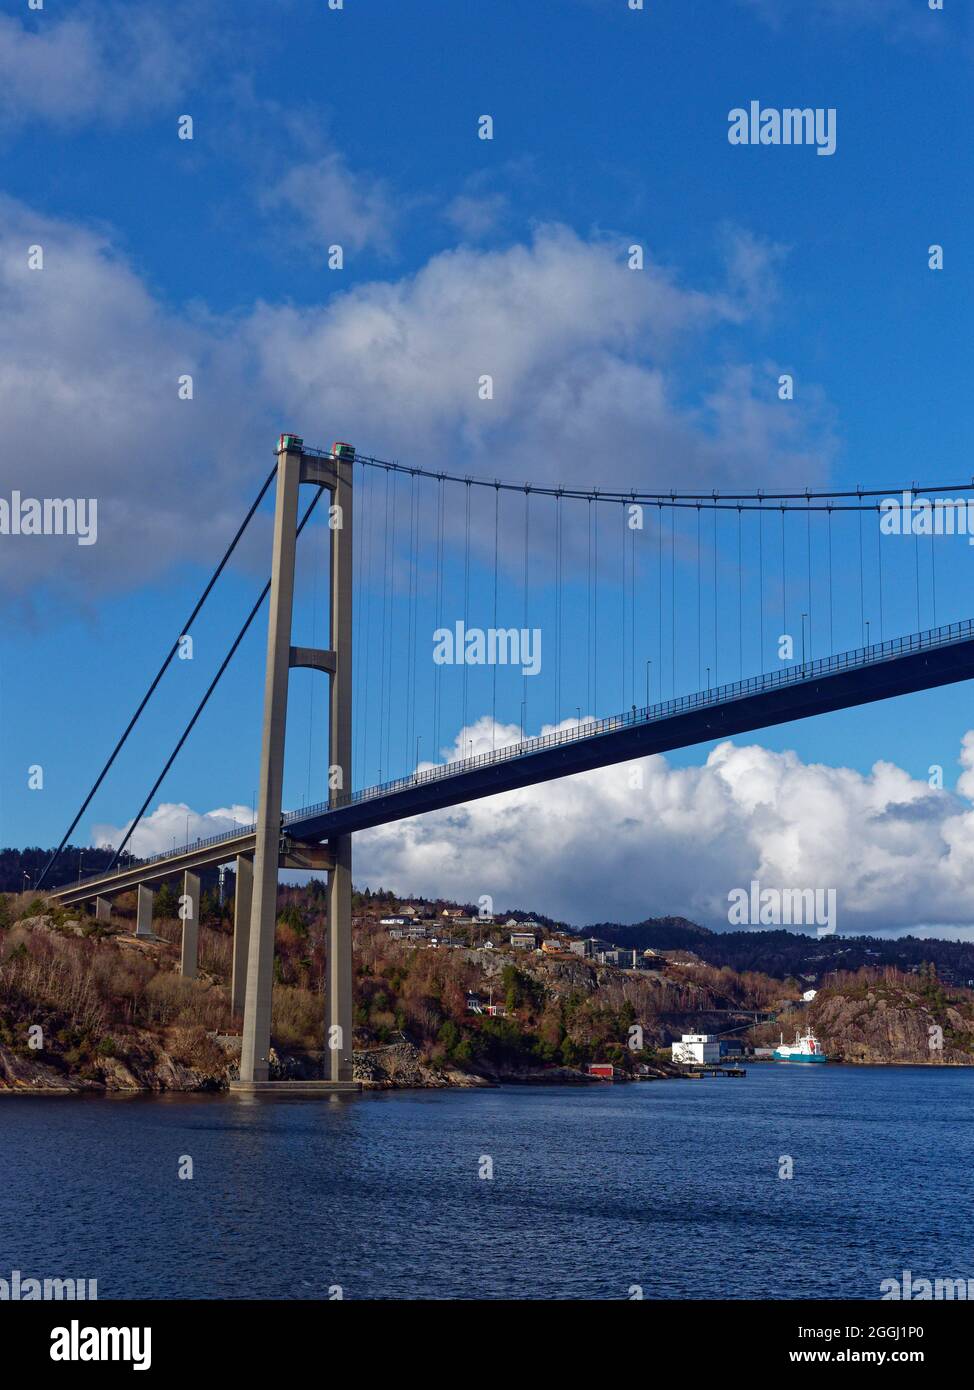 The North Tower of the Askoy Suspension Bridge near to Bergen crossing the Fjord allowing traffic to flow between the Coastal Islands. Stock Photo